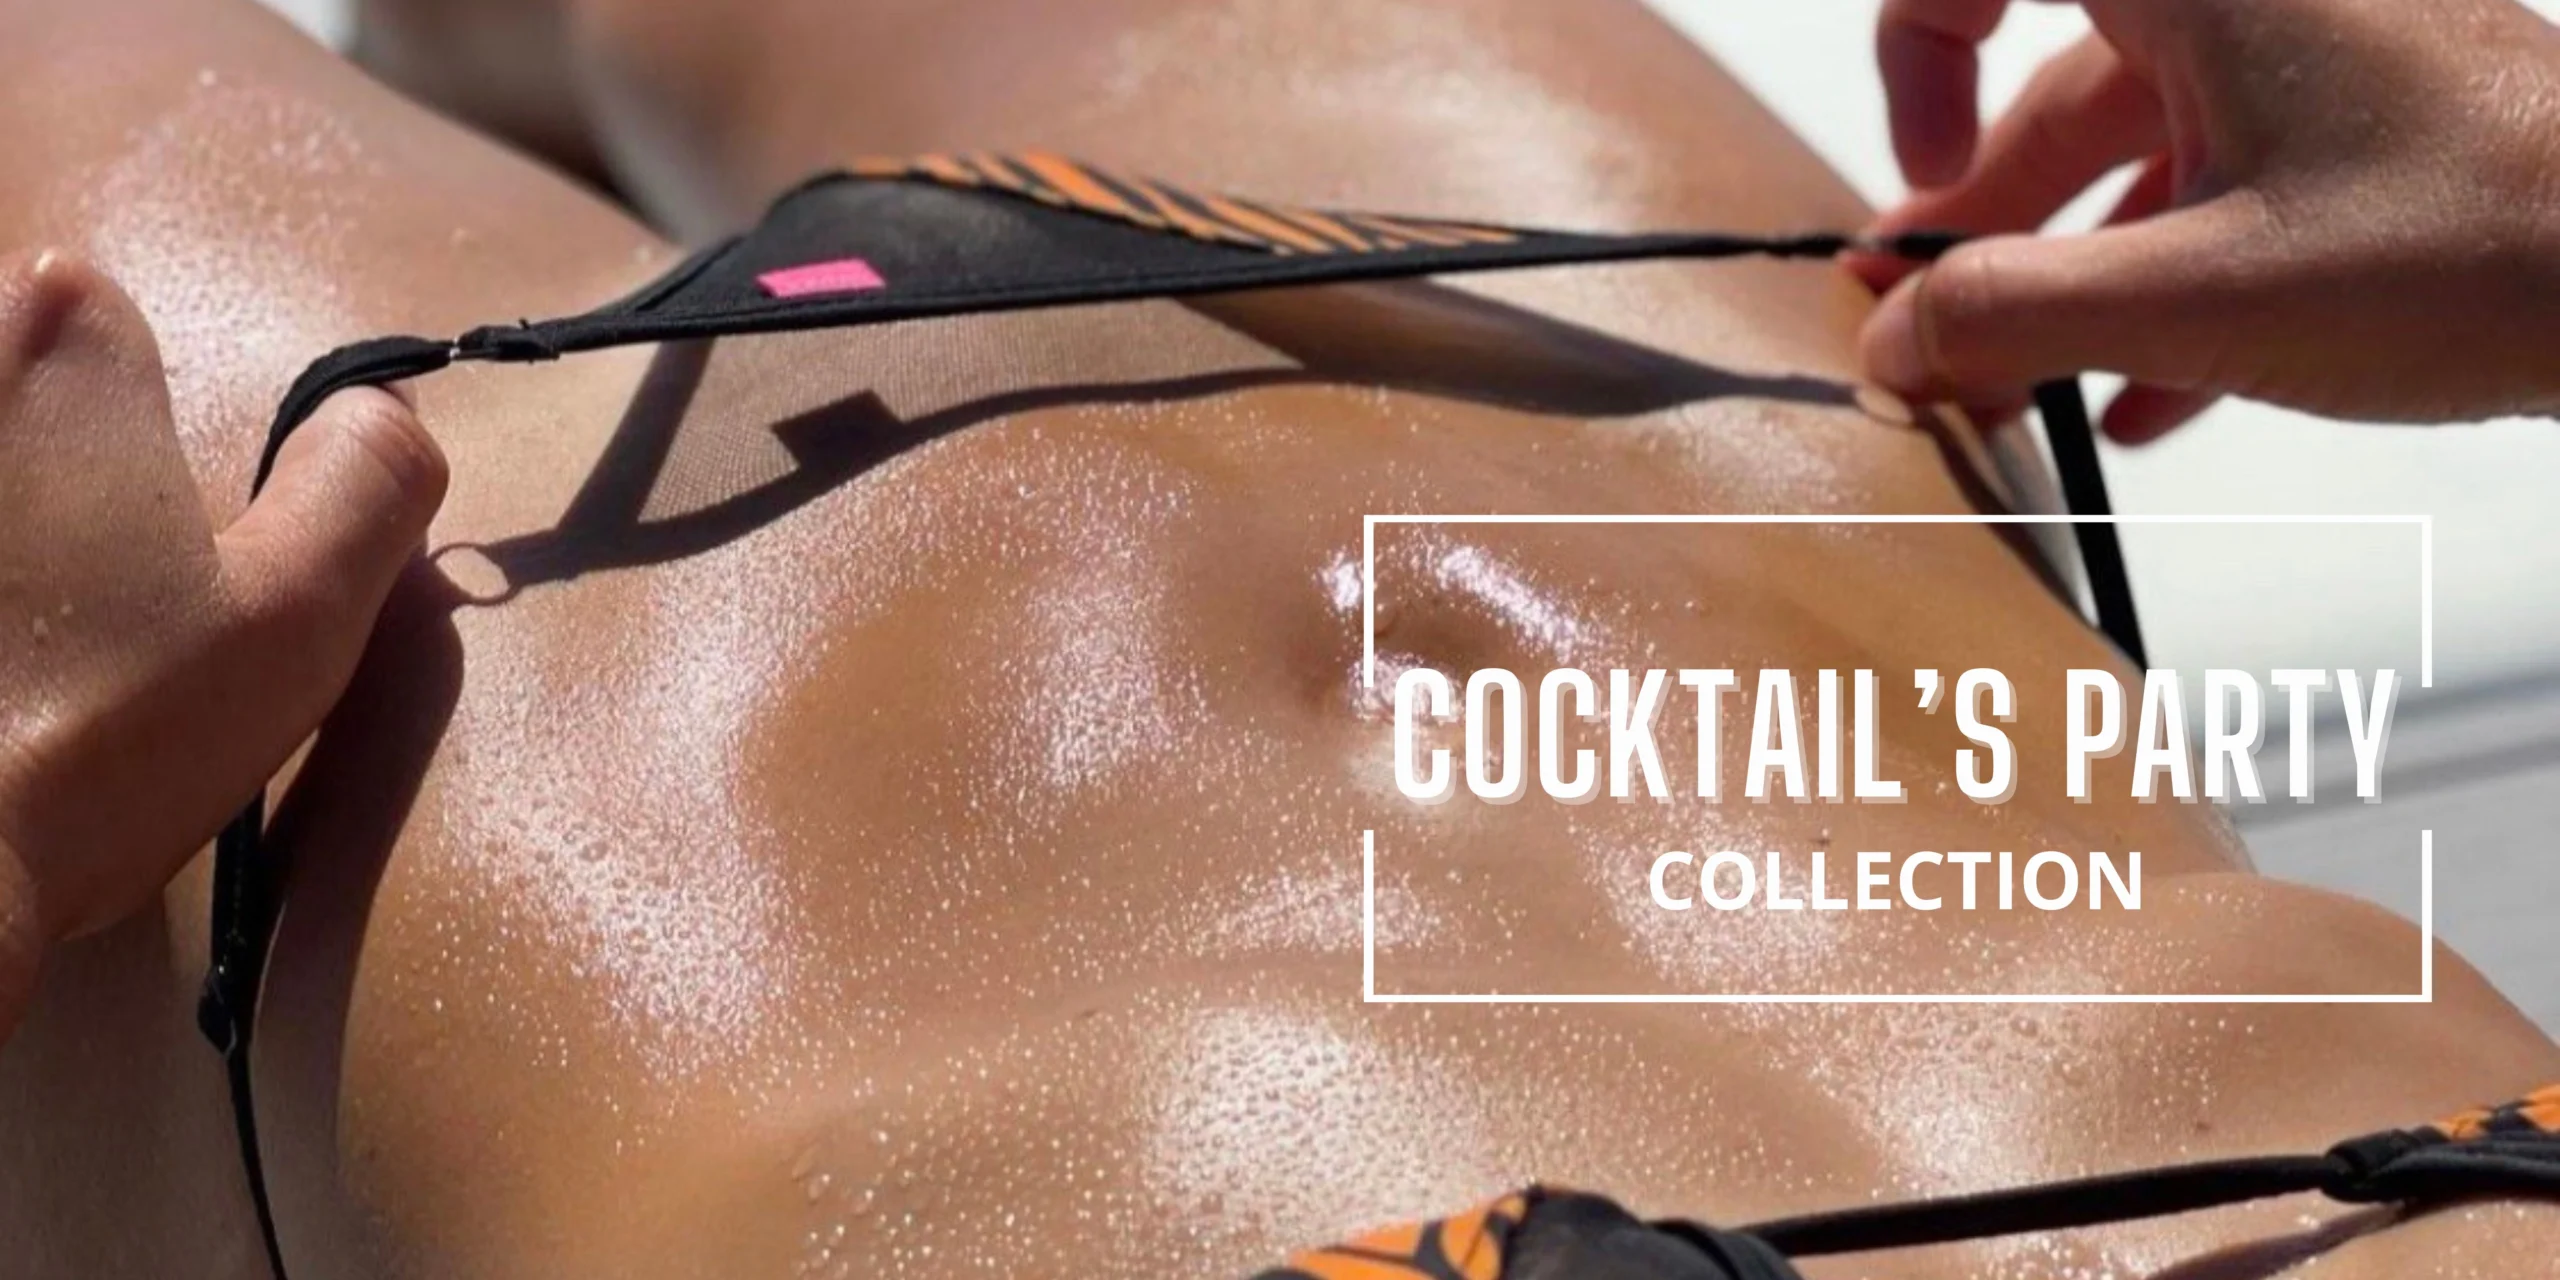 Cocktail's Party Micro Bikinis Collection by Oh Lola Swimwear